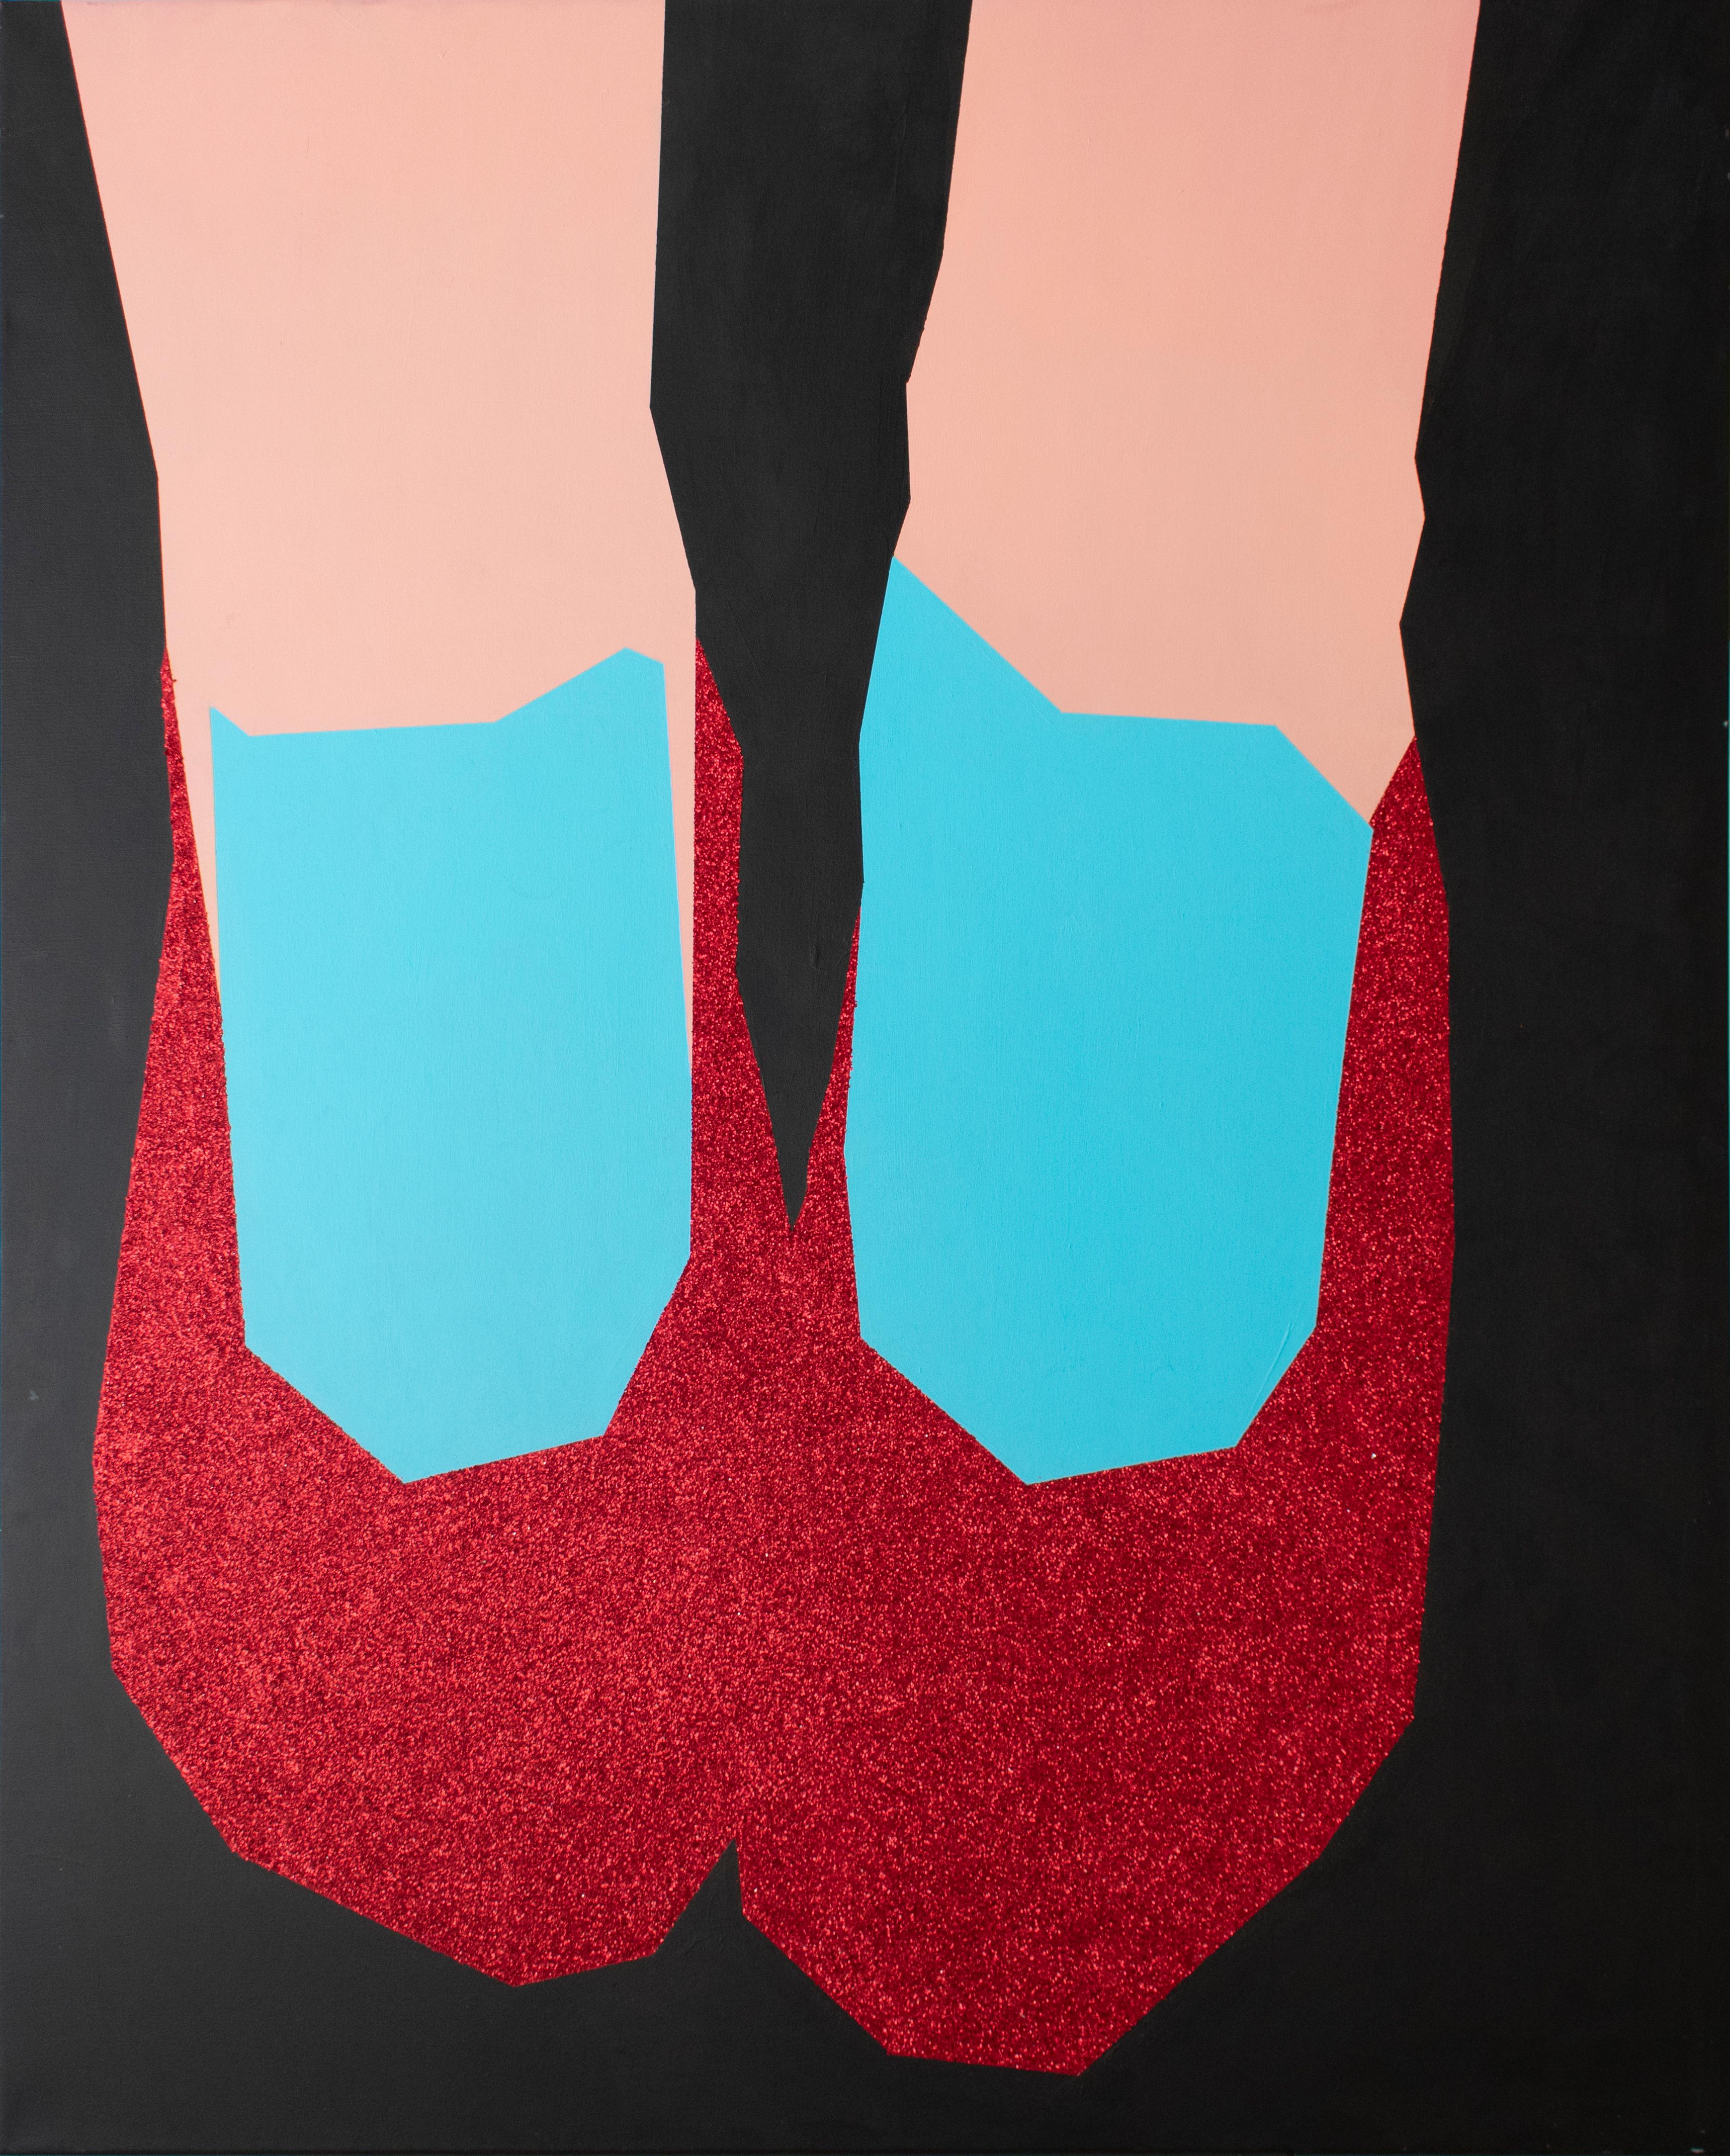 Abel Ramirez Abstract Painting - No Place Like Home (Abstract Still Life Painting of Dorothy's Ruby Red Slippers)